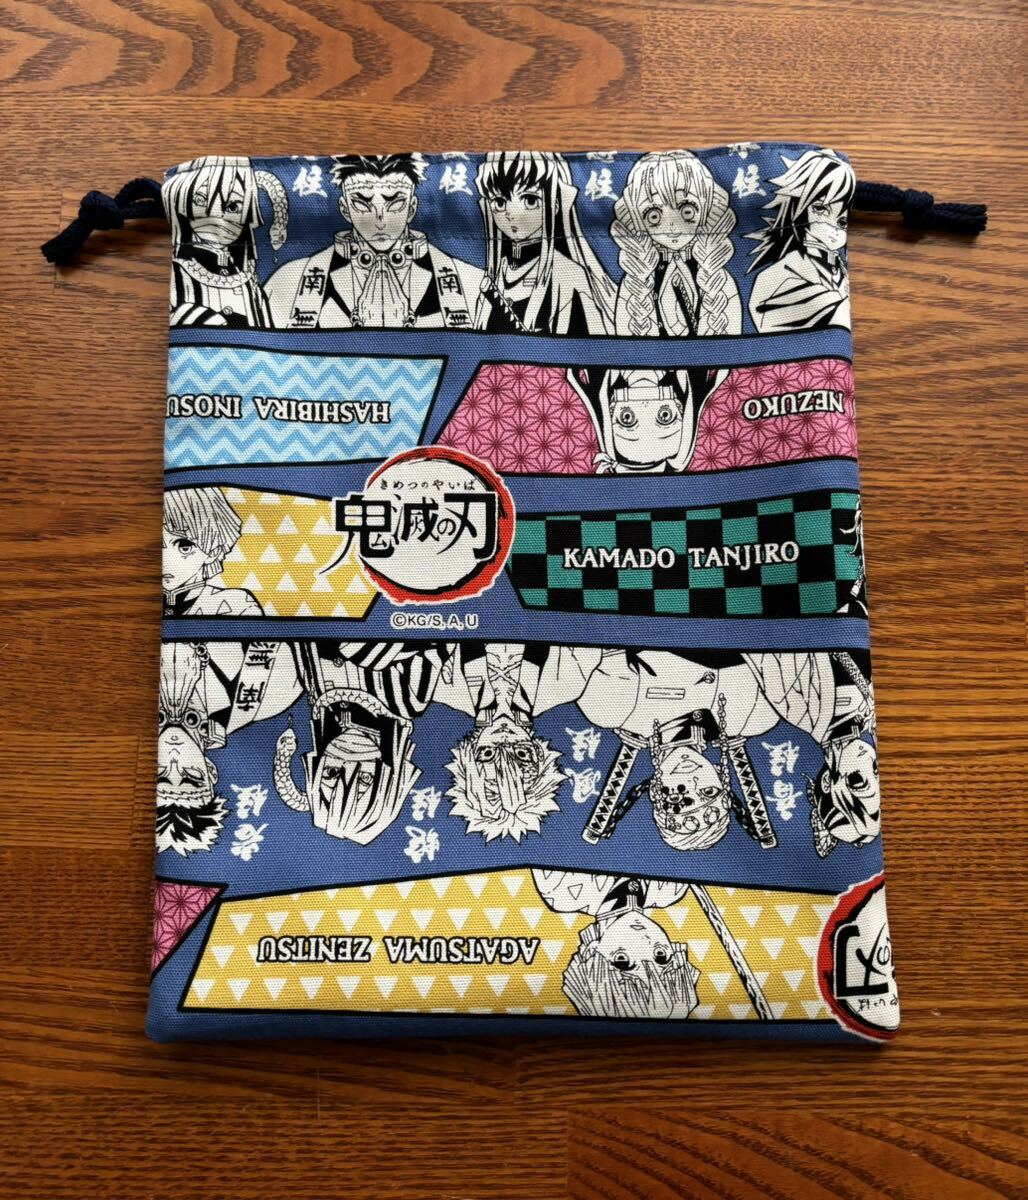  pouch 25.×20. pillar hand made lunch sack storage case case pouch bag-in-bag organizer ... blade anime goods character 